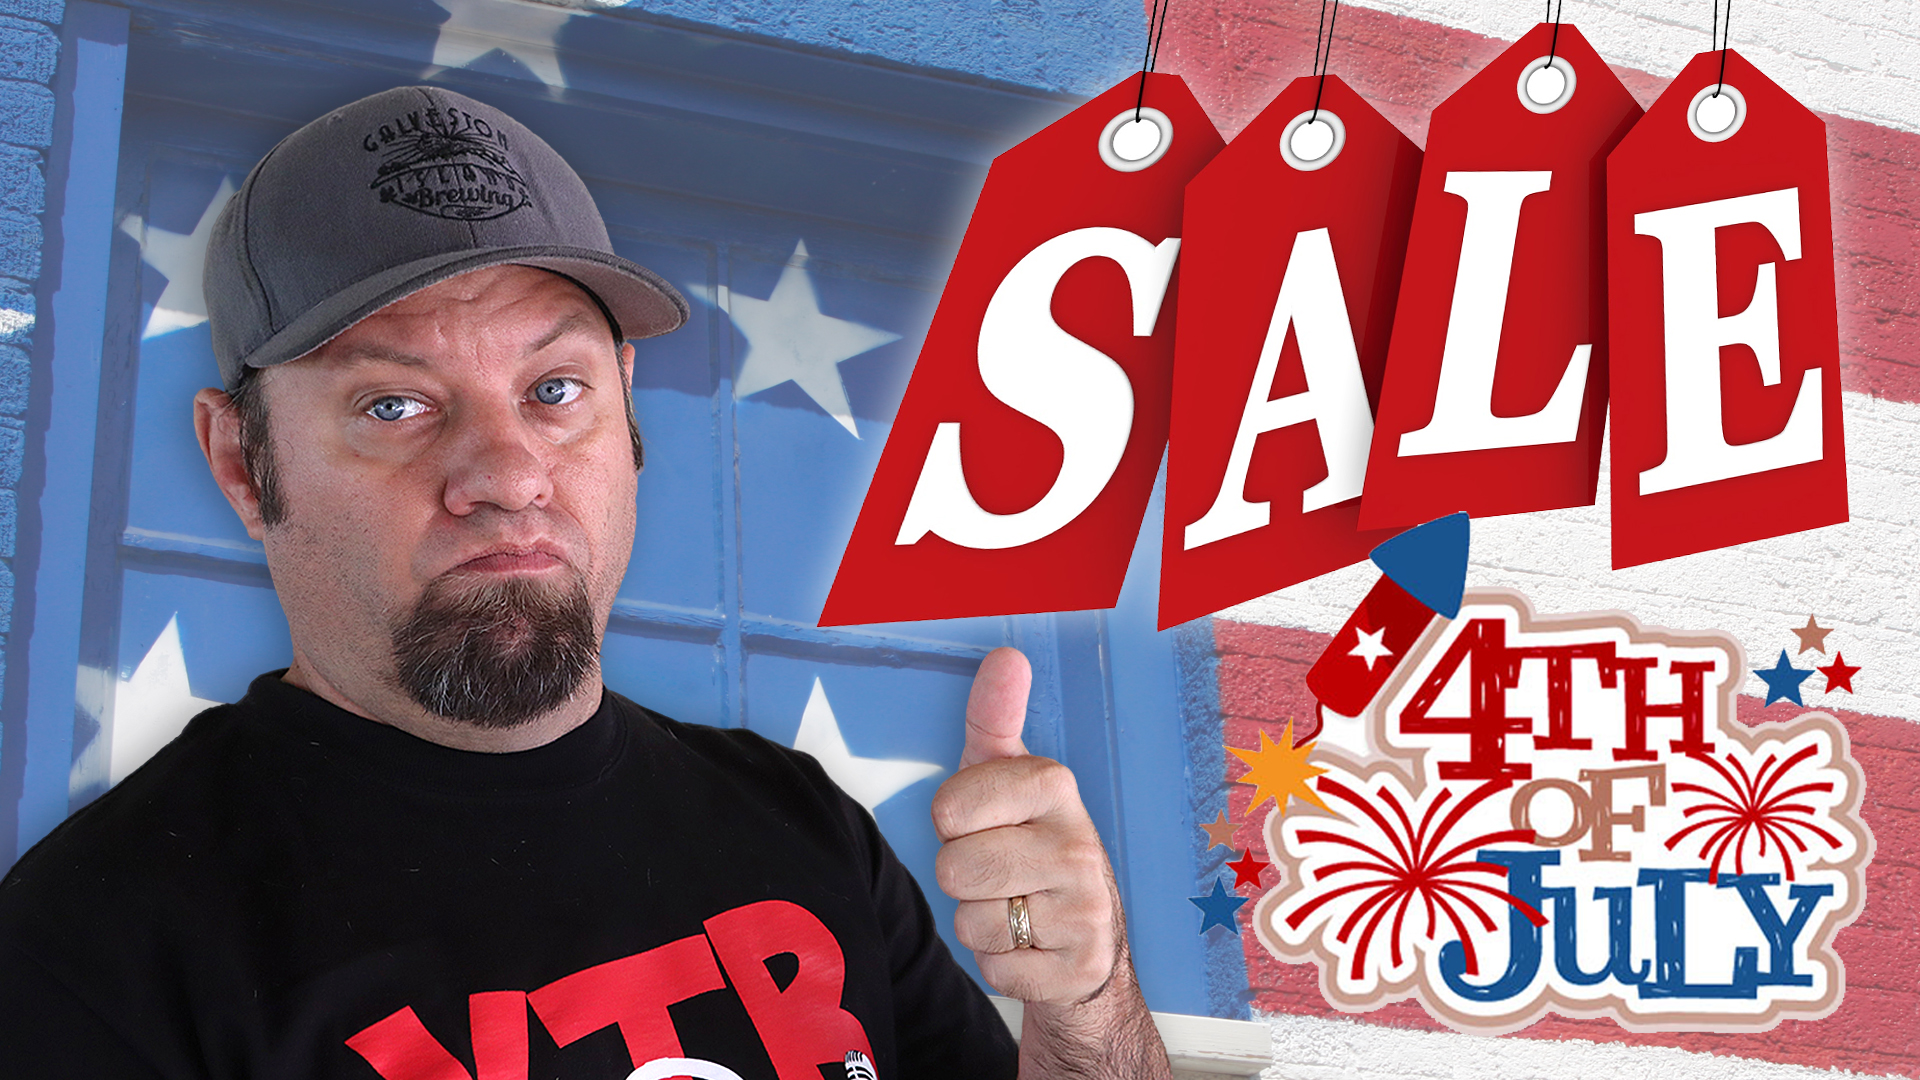 Episode 408: Ham Radio Shopping Deals for 4th Of July Weekend